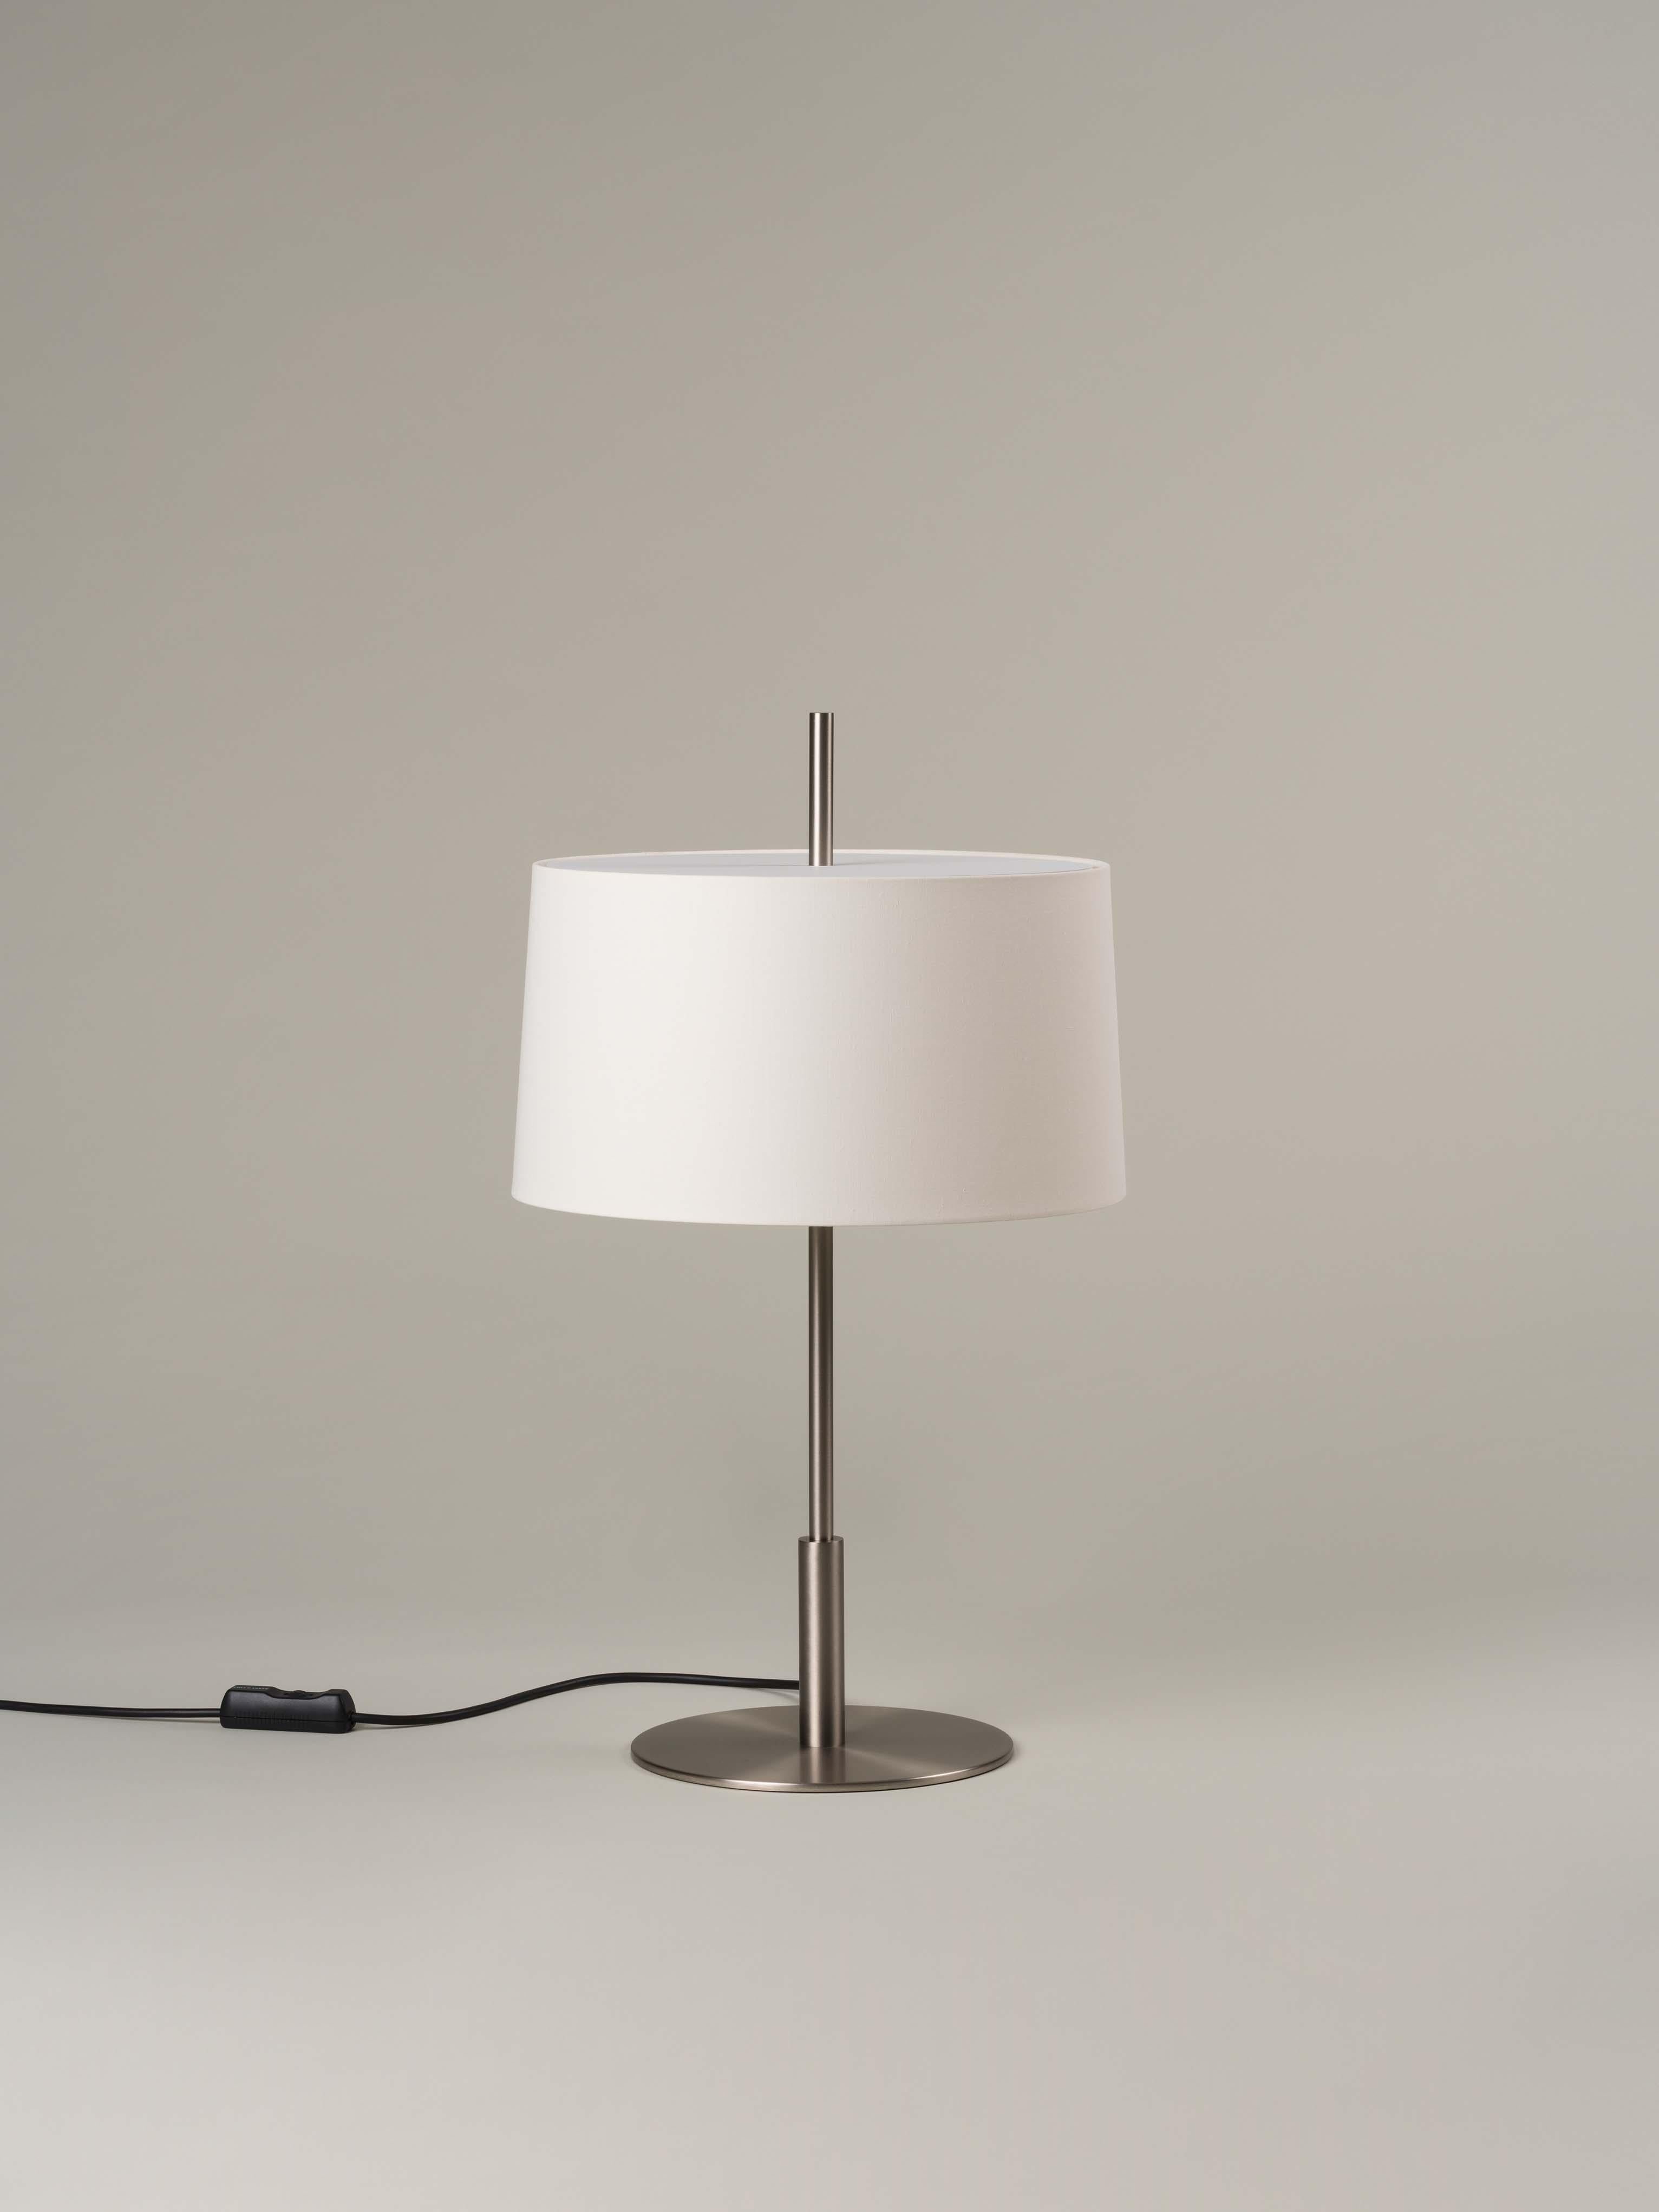 Nickel Diana menor table lamp by Federico Correa, Alfonso Milá, Miguel Milá
Dimensions: D 40 x H 66 cm
Materials: White linen, nickel.
Available in black or white lampshade and in gold or nickel finish.

In keeping with the calling of its